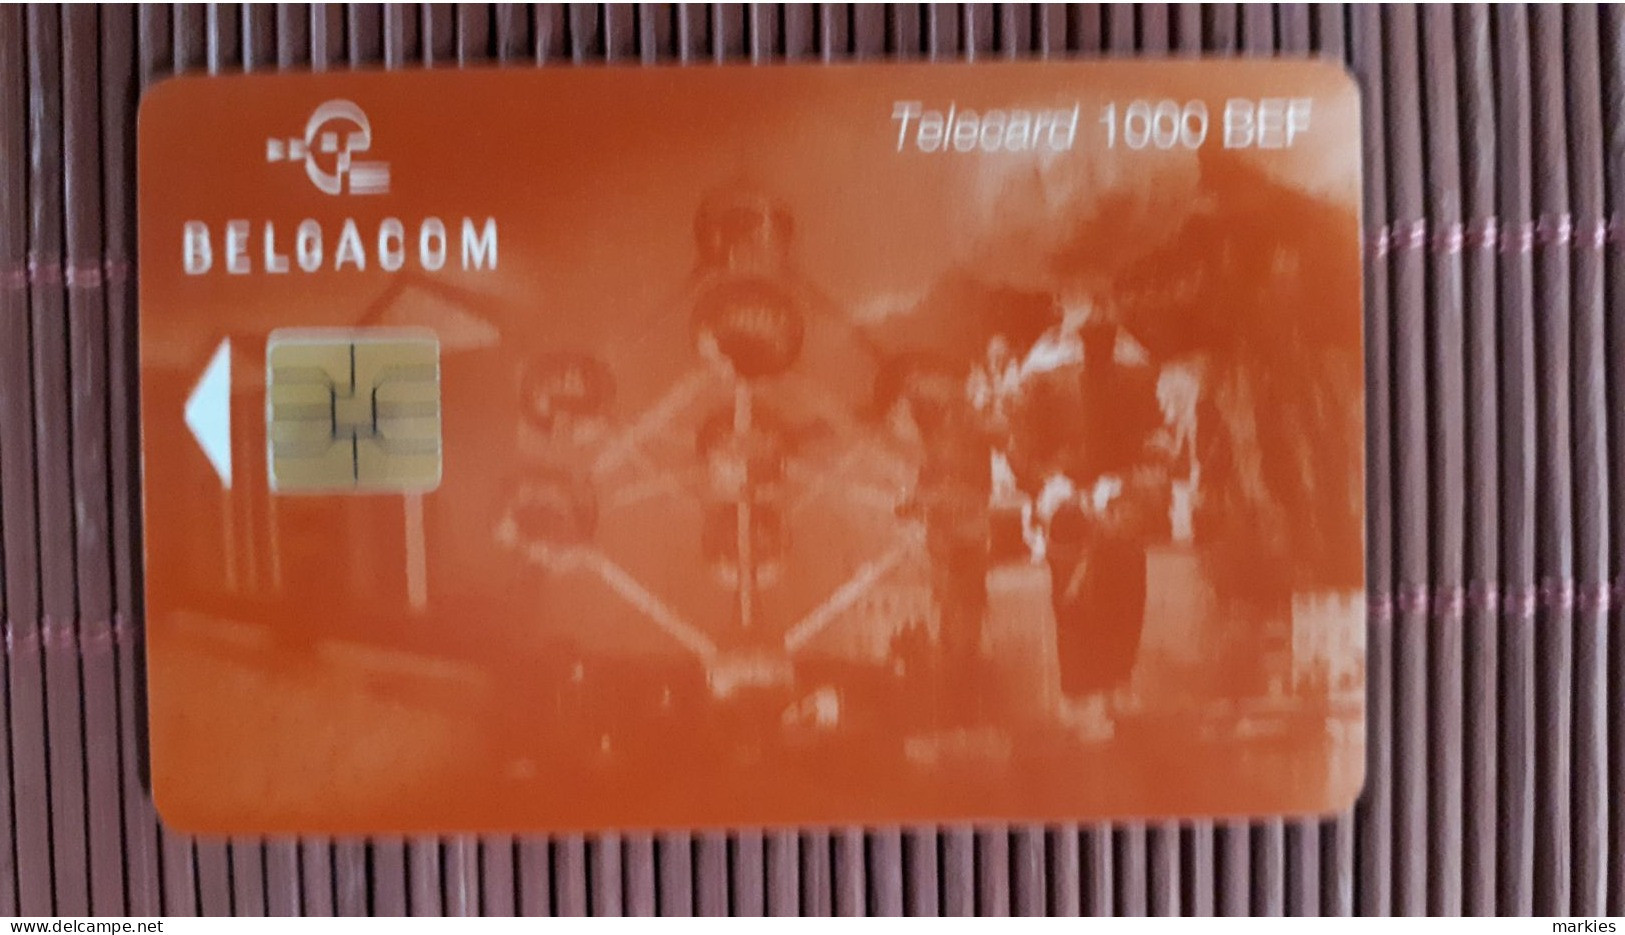 Phonecard Atomium 1000 BEF FI 30/06/2001 Used Only 20.000 Made Rare - Mit Chip